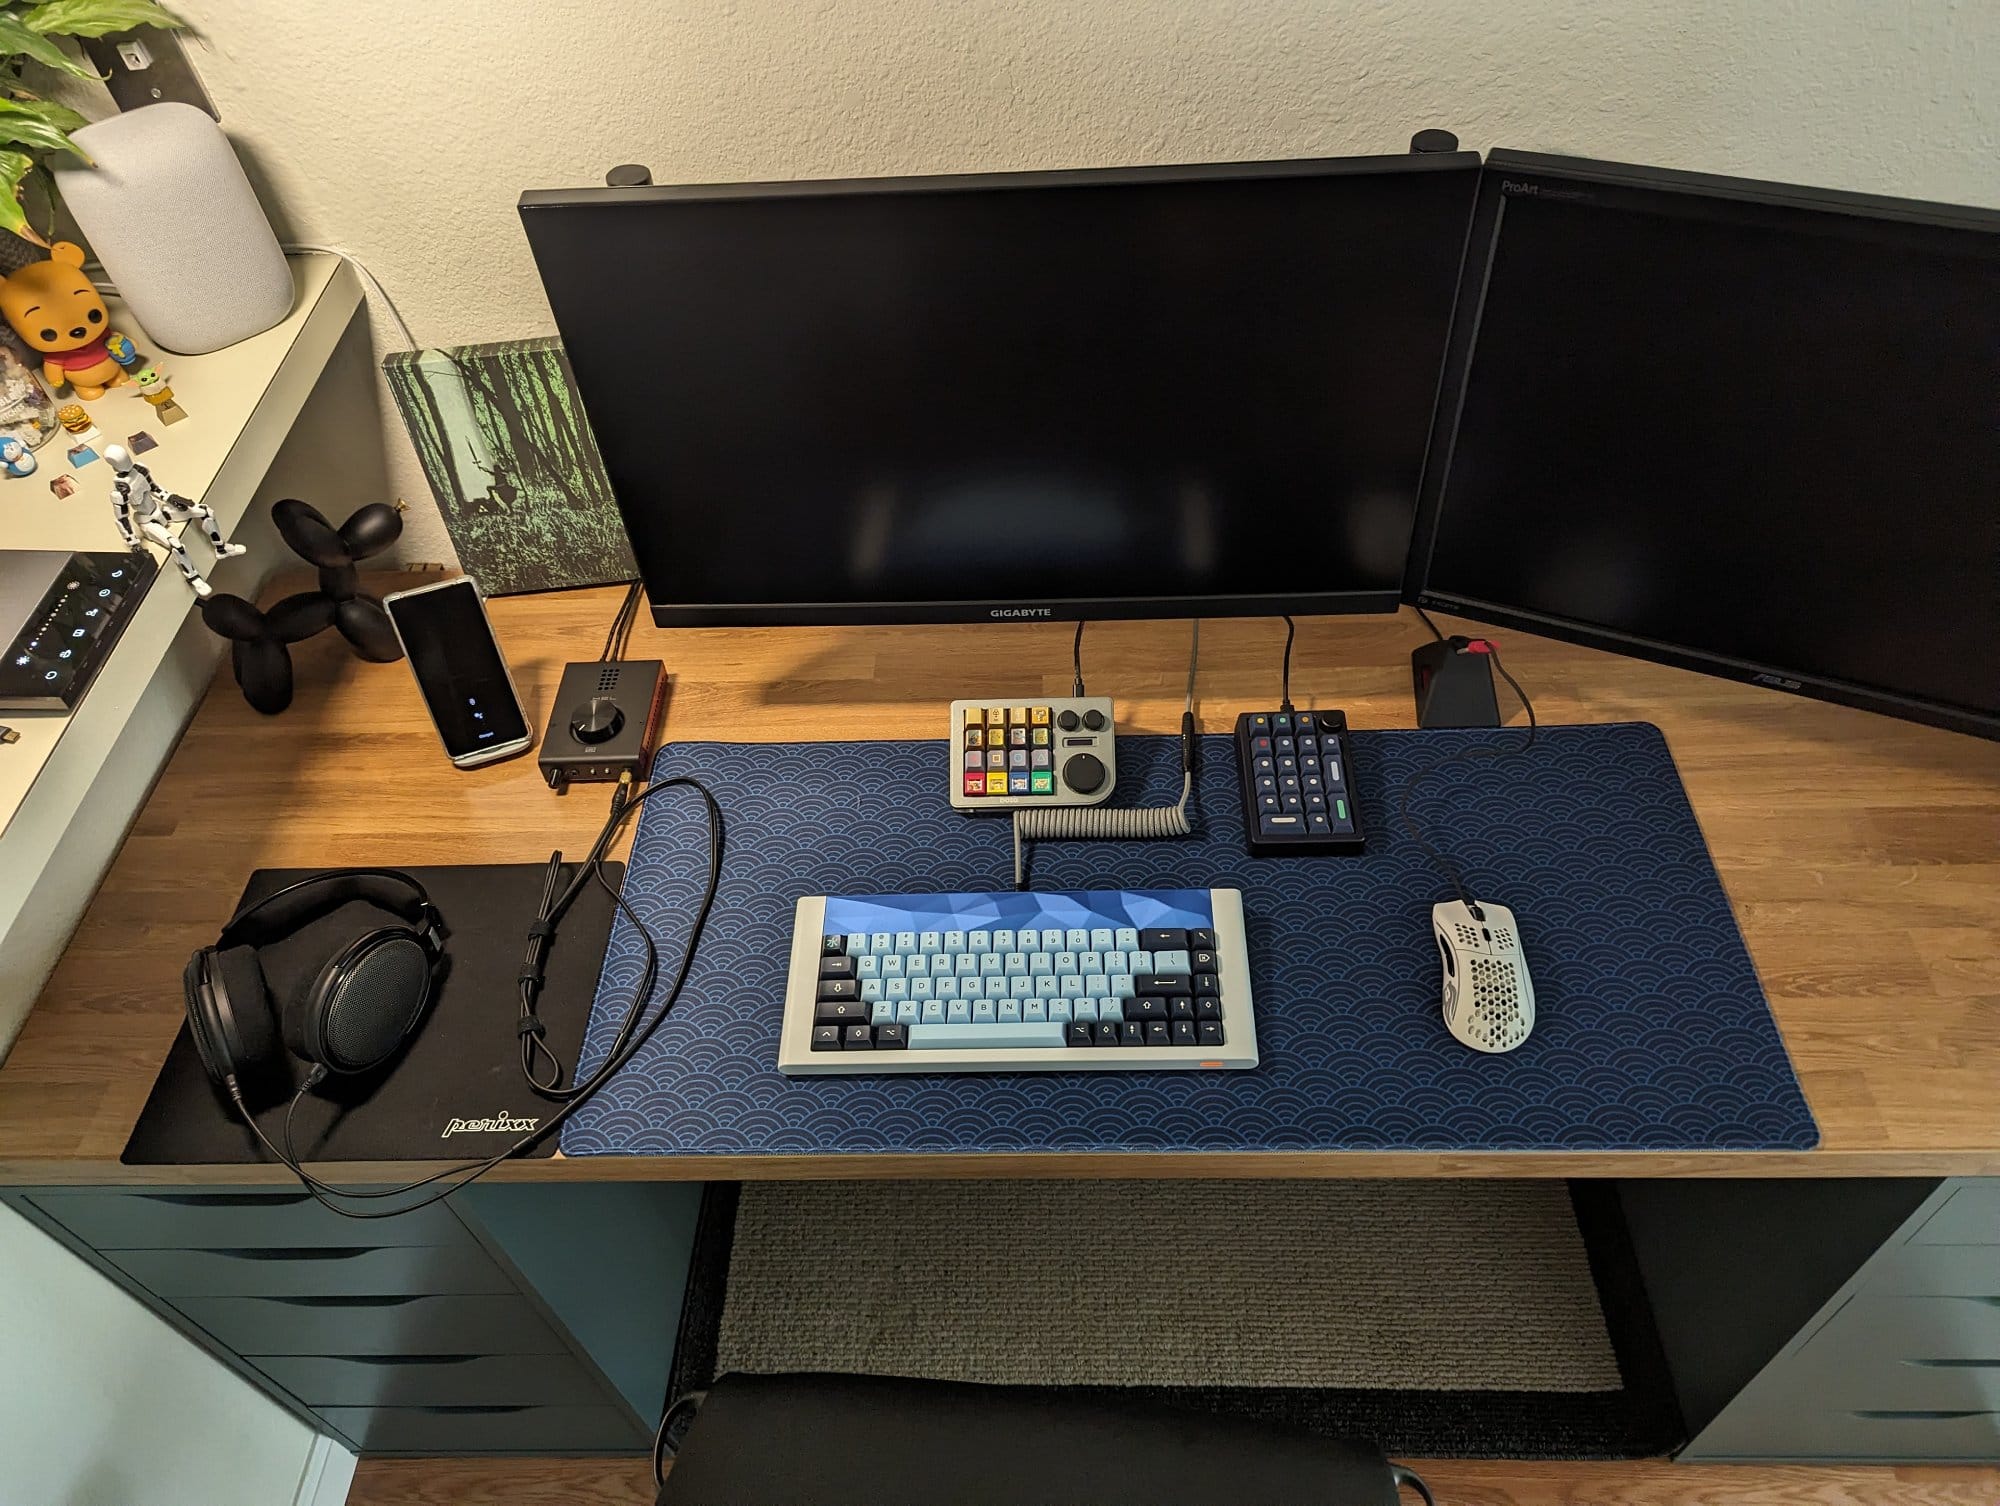 A neat desk setup with two turned-off monitors, a mechanical keyboard, headphones on a mat, and various desk accessories, with a shelf holding small figurines to the side